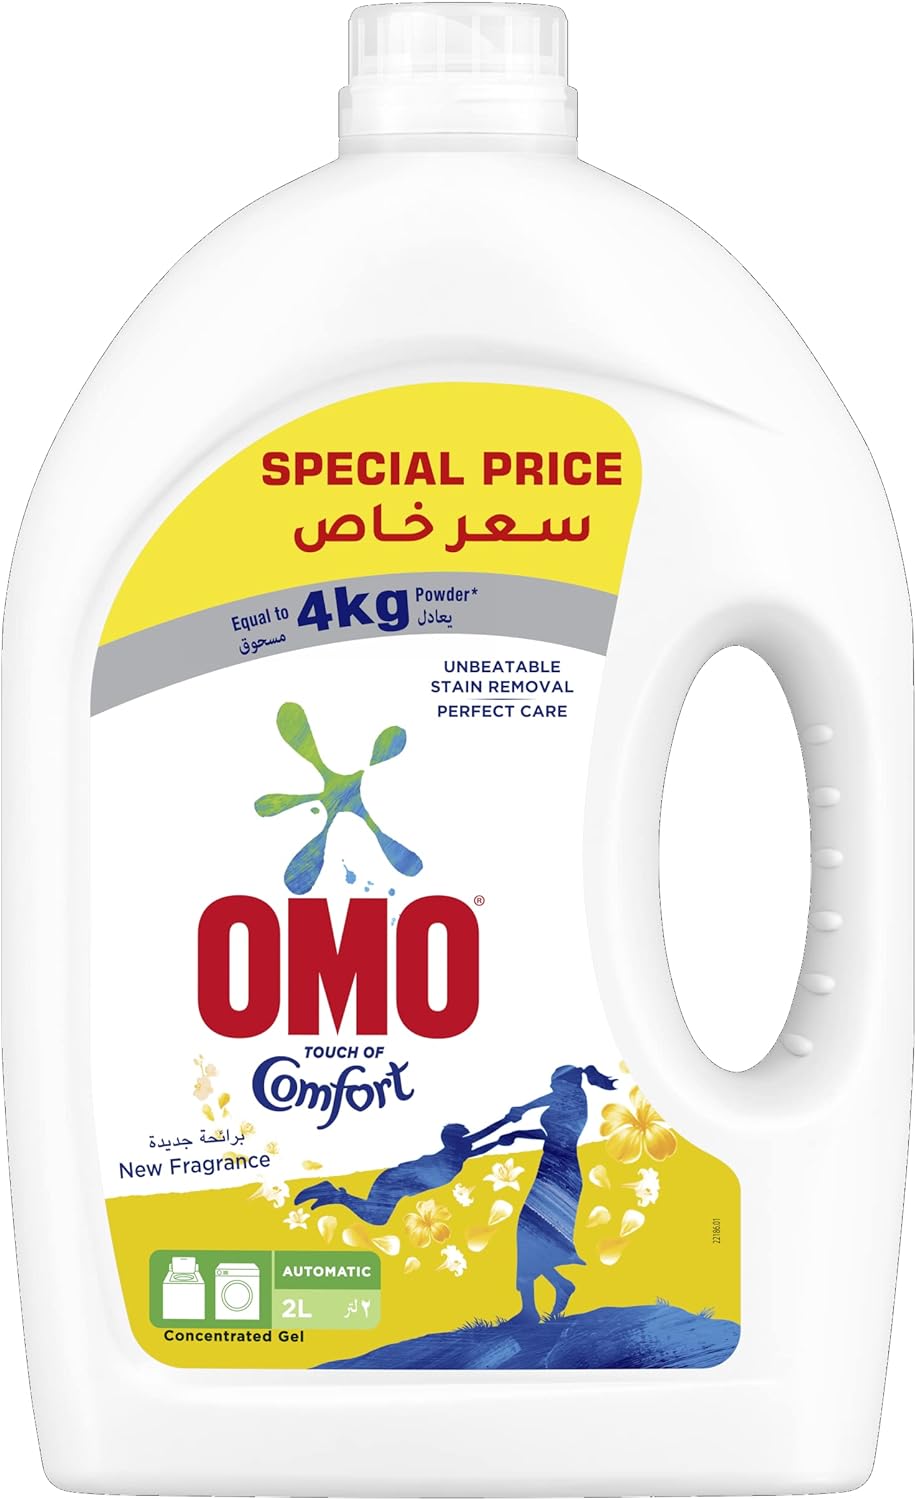 Omo Automatic Liquid Laundry Detergent, with a Touch of Comfort, 2L